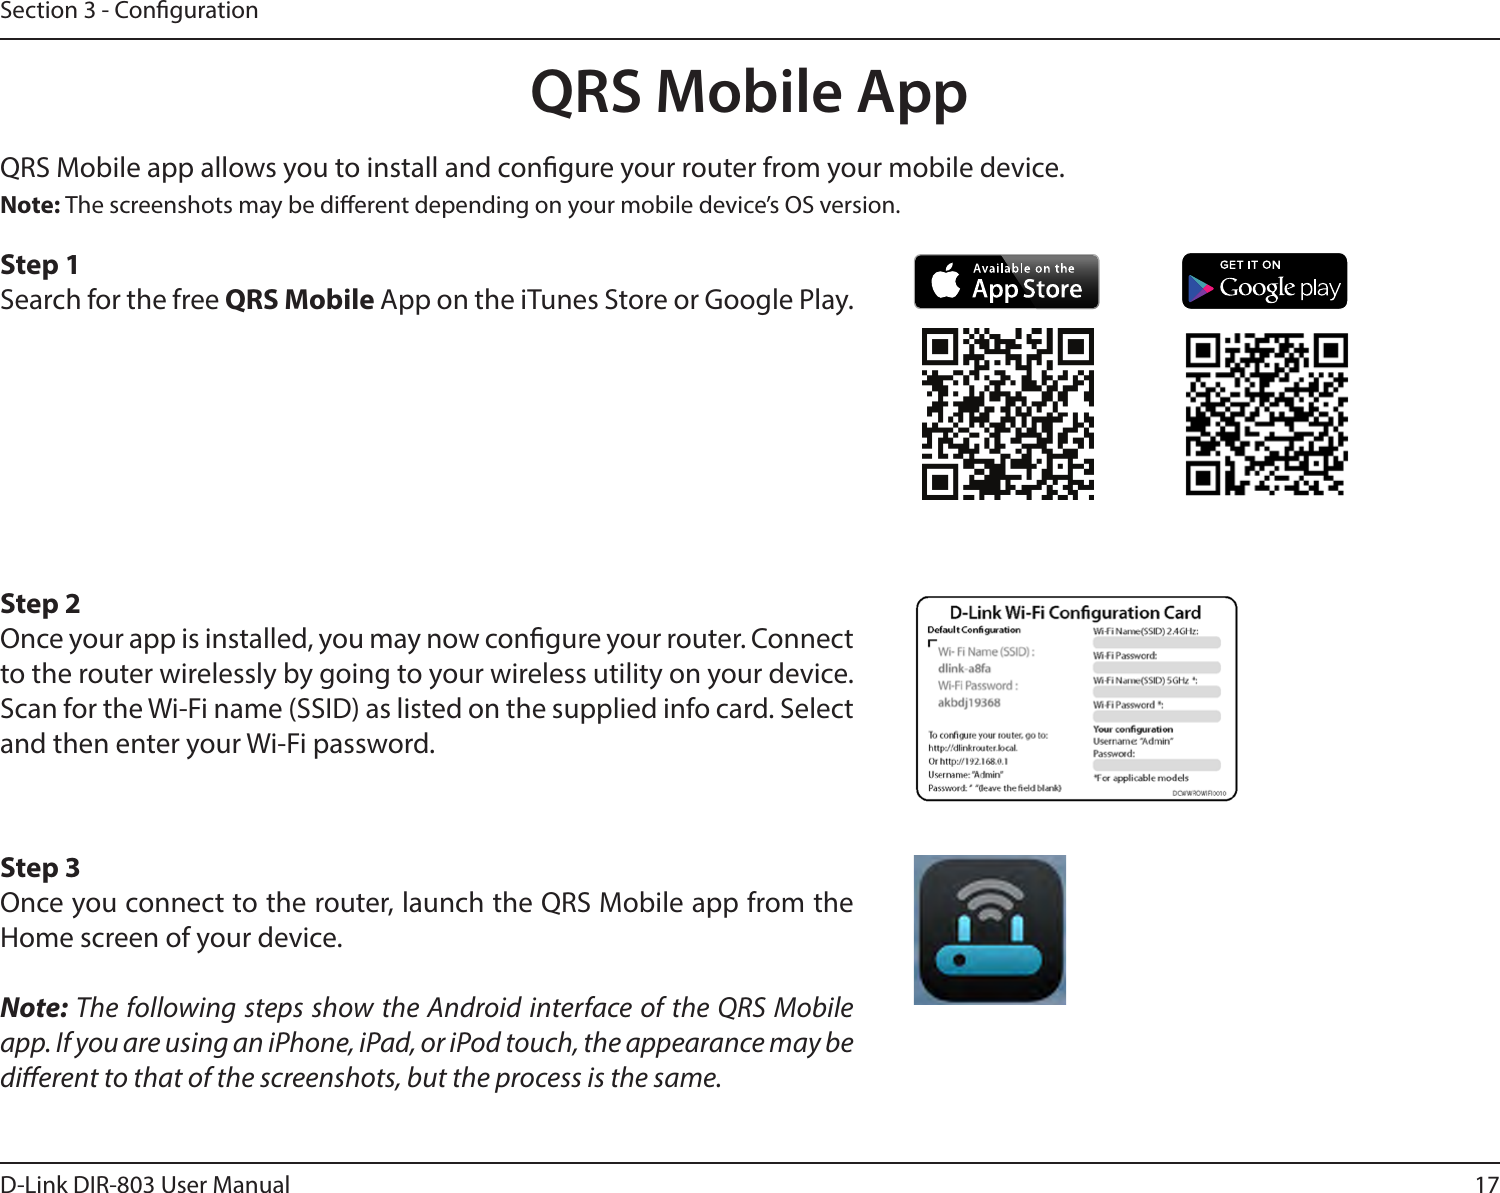 17D-Link DIR-803 User ManualSection 3 - CongurationQRS Mobile app allows you to install and congure your router from your mobile device. Step 1Search for the free QRS Mobile App on the iTunes Store or Google Play.Step 2Once your app is installed, you may now congure your router. Connect to the router wirelessly by going to your wireless utility on your device. Scan for the Wi-Fi name (SSID) as listed on the supplied info card. Select and then enter your Wi-Fi password.Step 3Once you connect to the router, launch the QRS Mobile app from the Home screen of your device.Note: The following steps show the Android interface of the QRS Mobile app. If you are using an iPhone, iPad, or iPod touch, the appearance may be dierent to that of the screenshots, but the process is the same.Note: The screenshots may be dierent depending on your mobile device’s OS version.QRS Mobile App